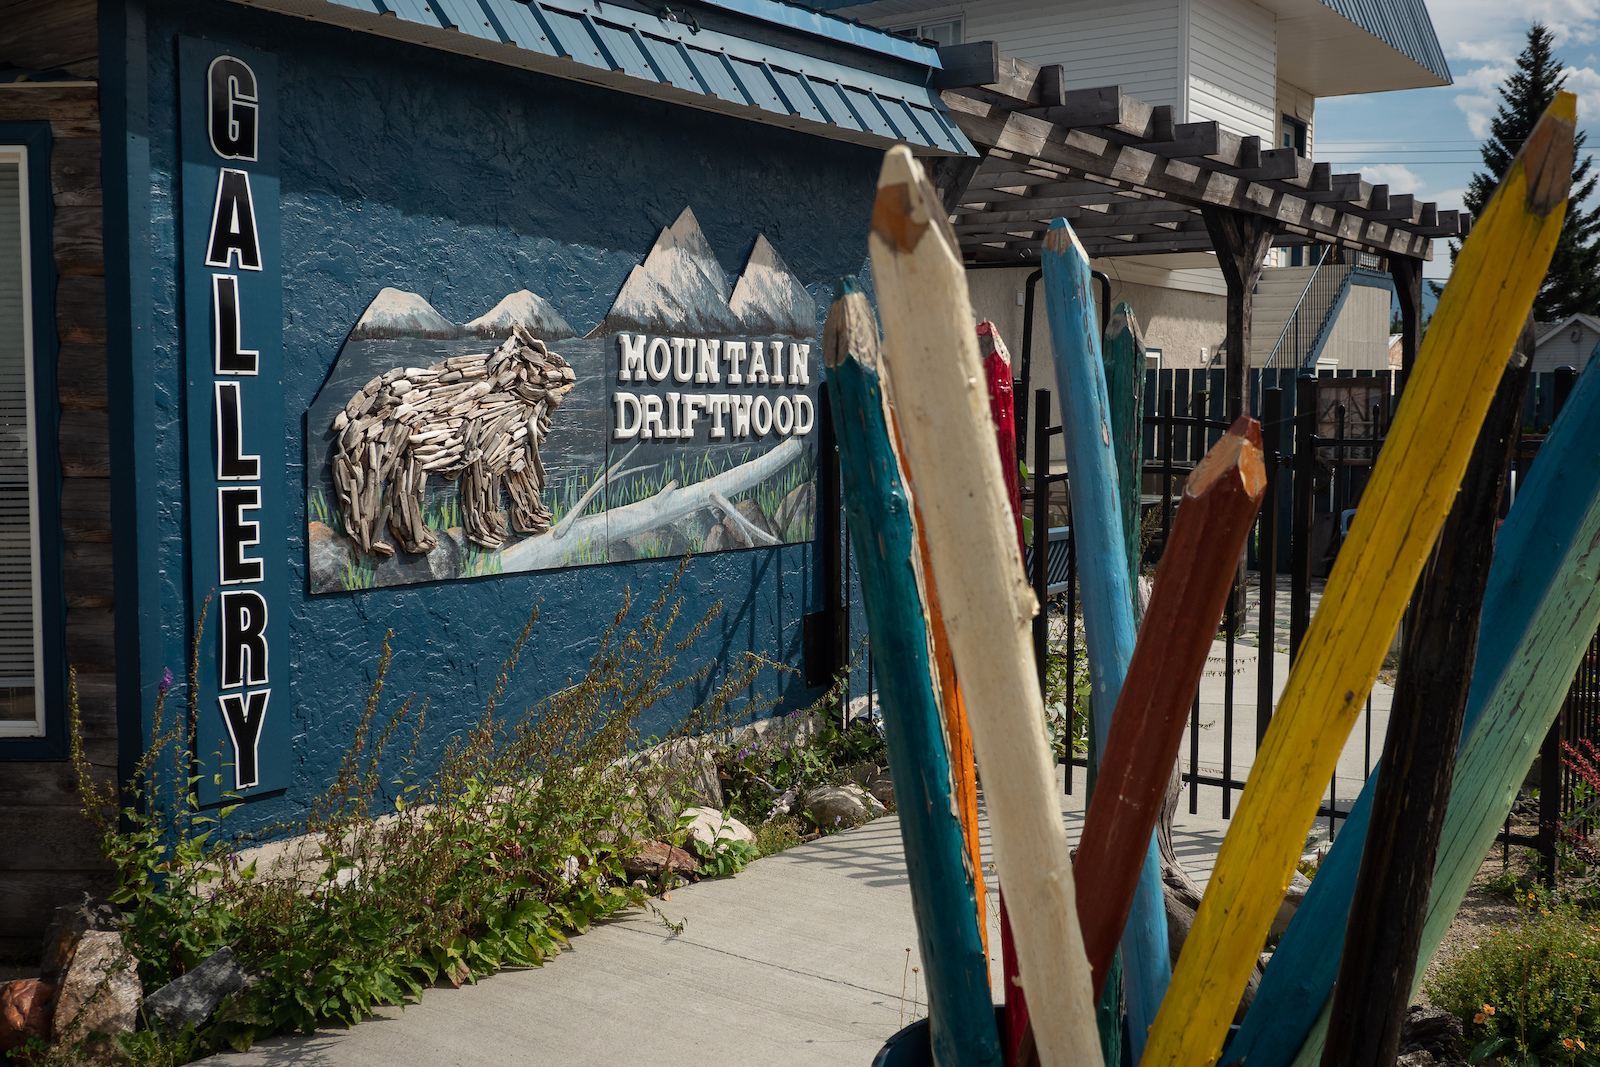 Lots of cool shops to check out exploring the main strip in Valemount